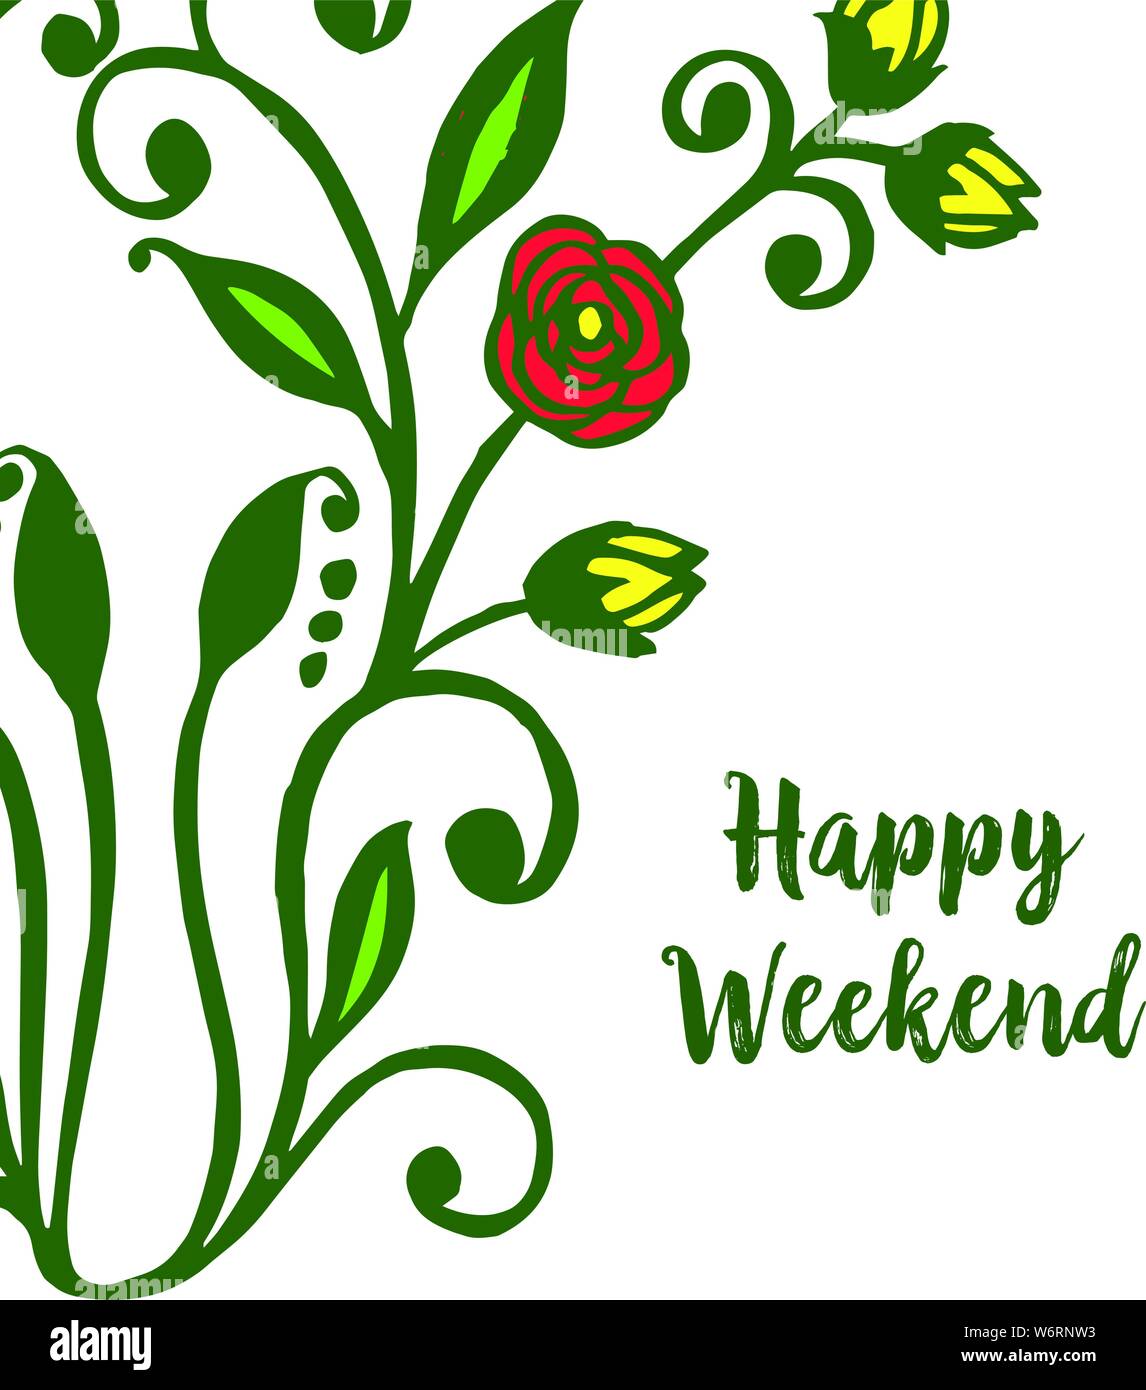 Happy weekend, beautiful greeting card background or banner, with ...